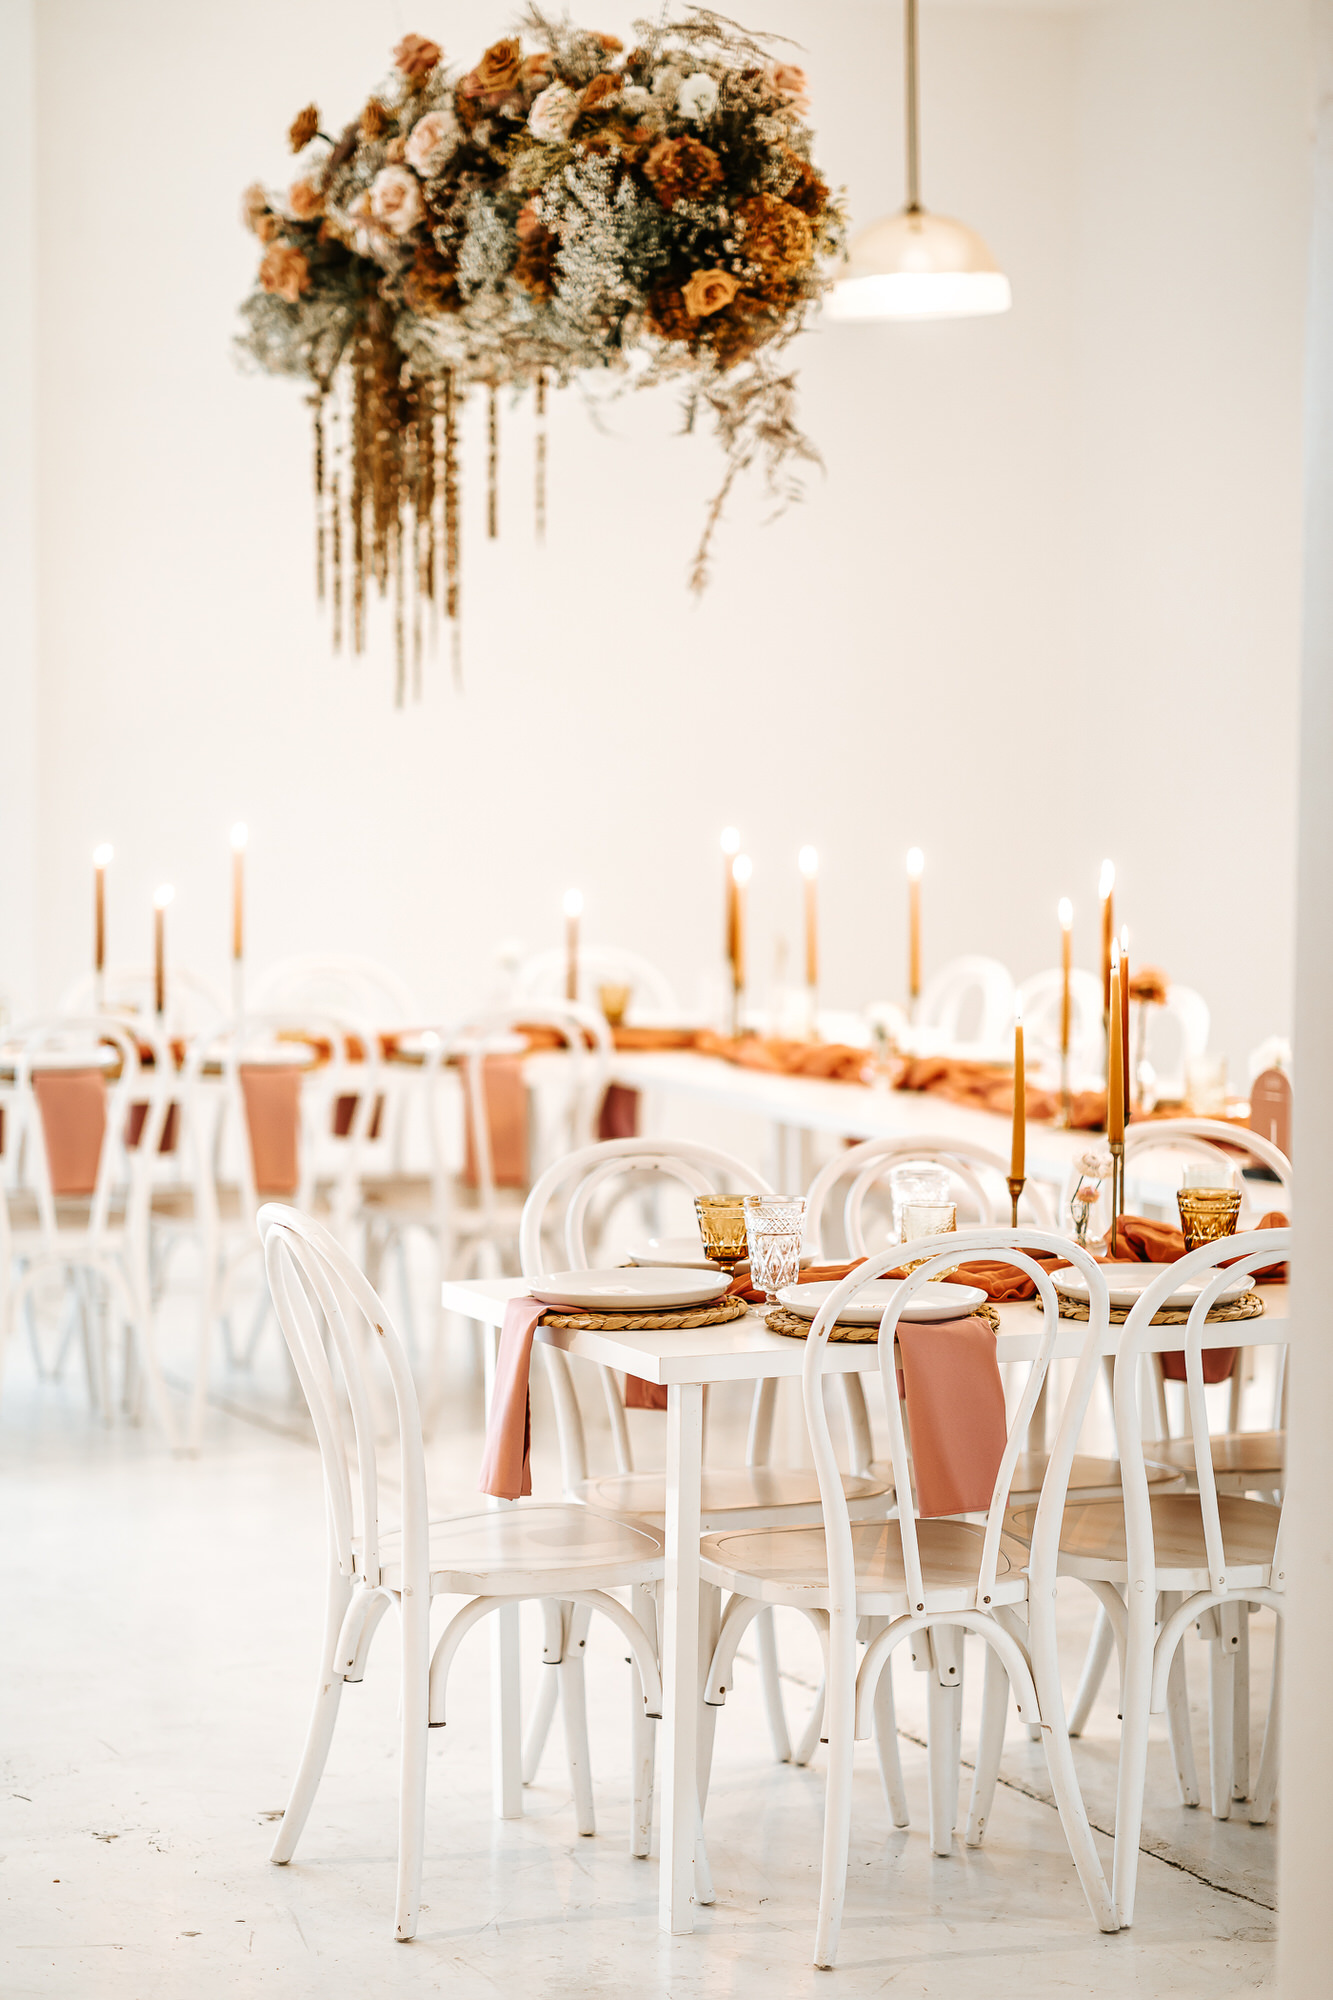 White bohemian wedding reception table details at the emerson venue.